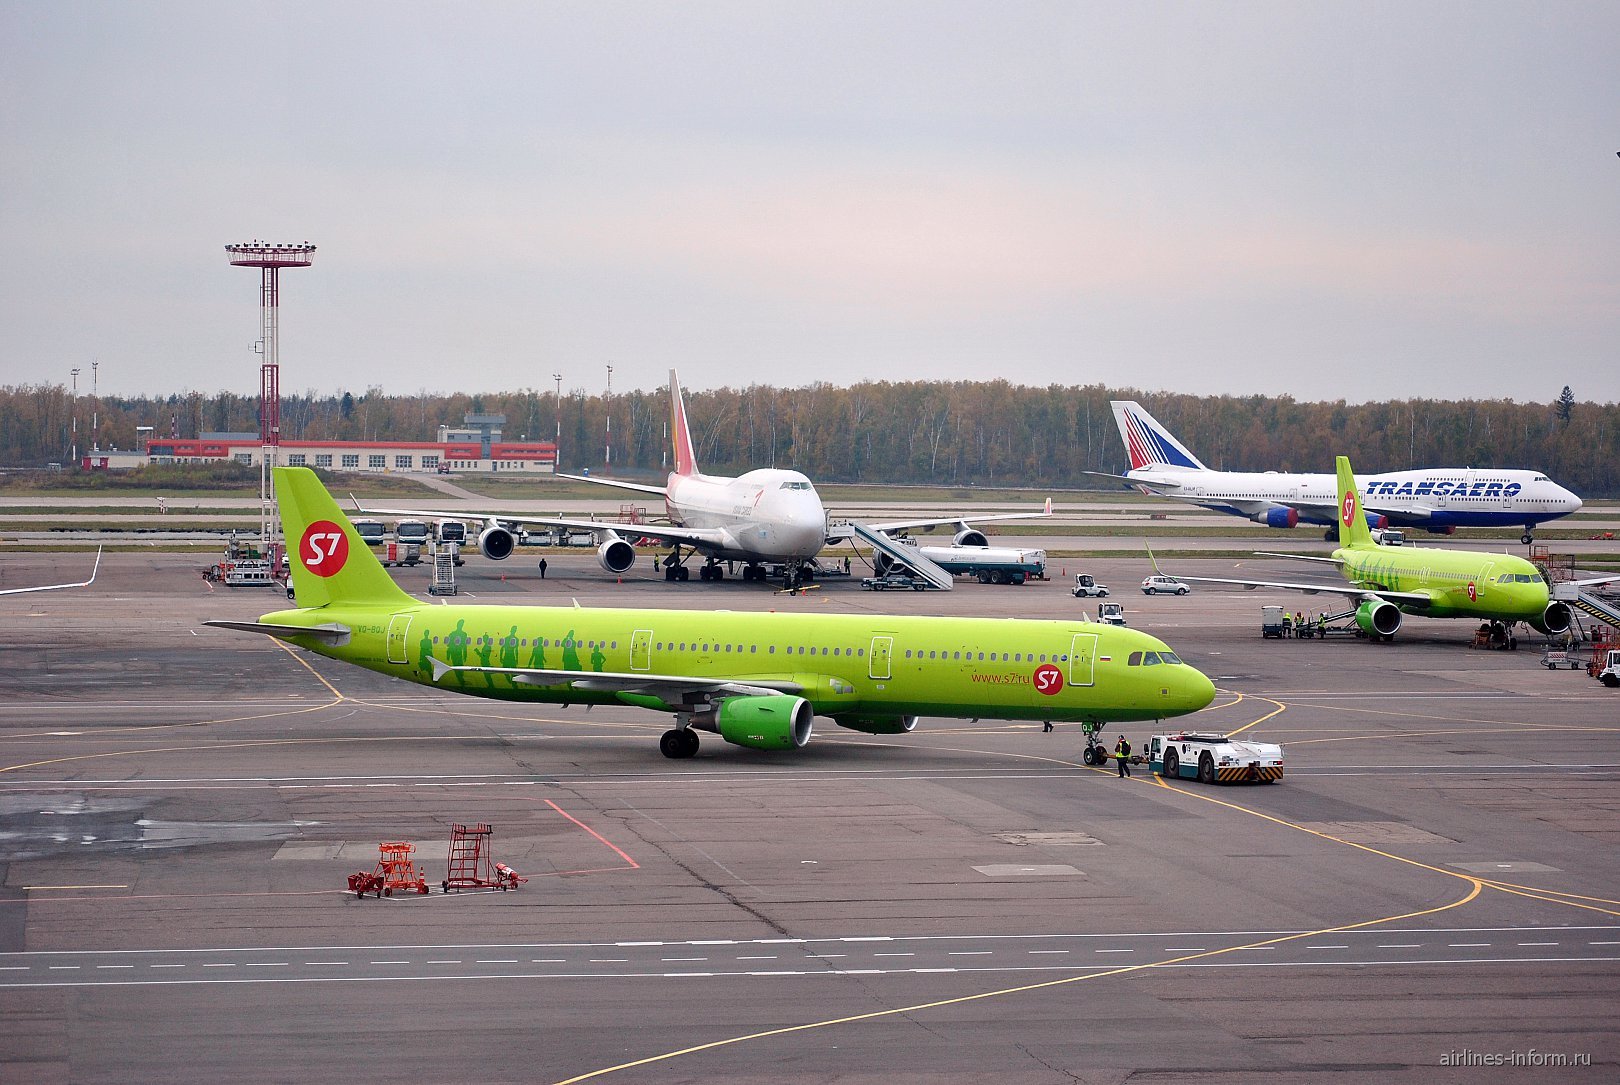 S7 airlines москва. Самолёт s7 Airlines Airbus a321. Airbus a320 s7 Домодедово. С7 а321 Нео. А321 s7 Airlines Домодедово.